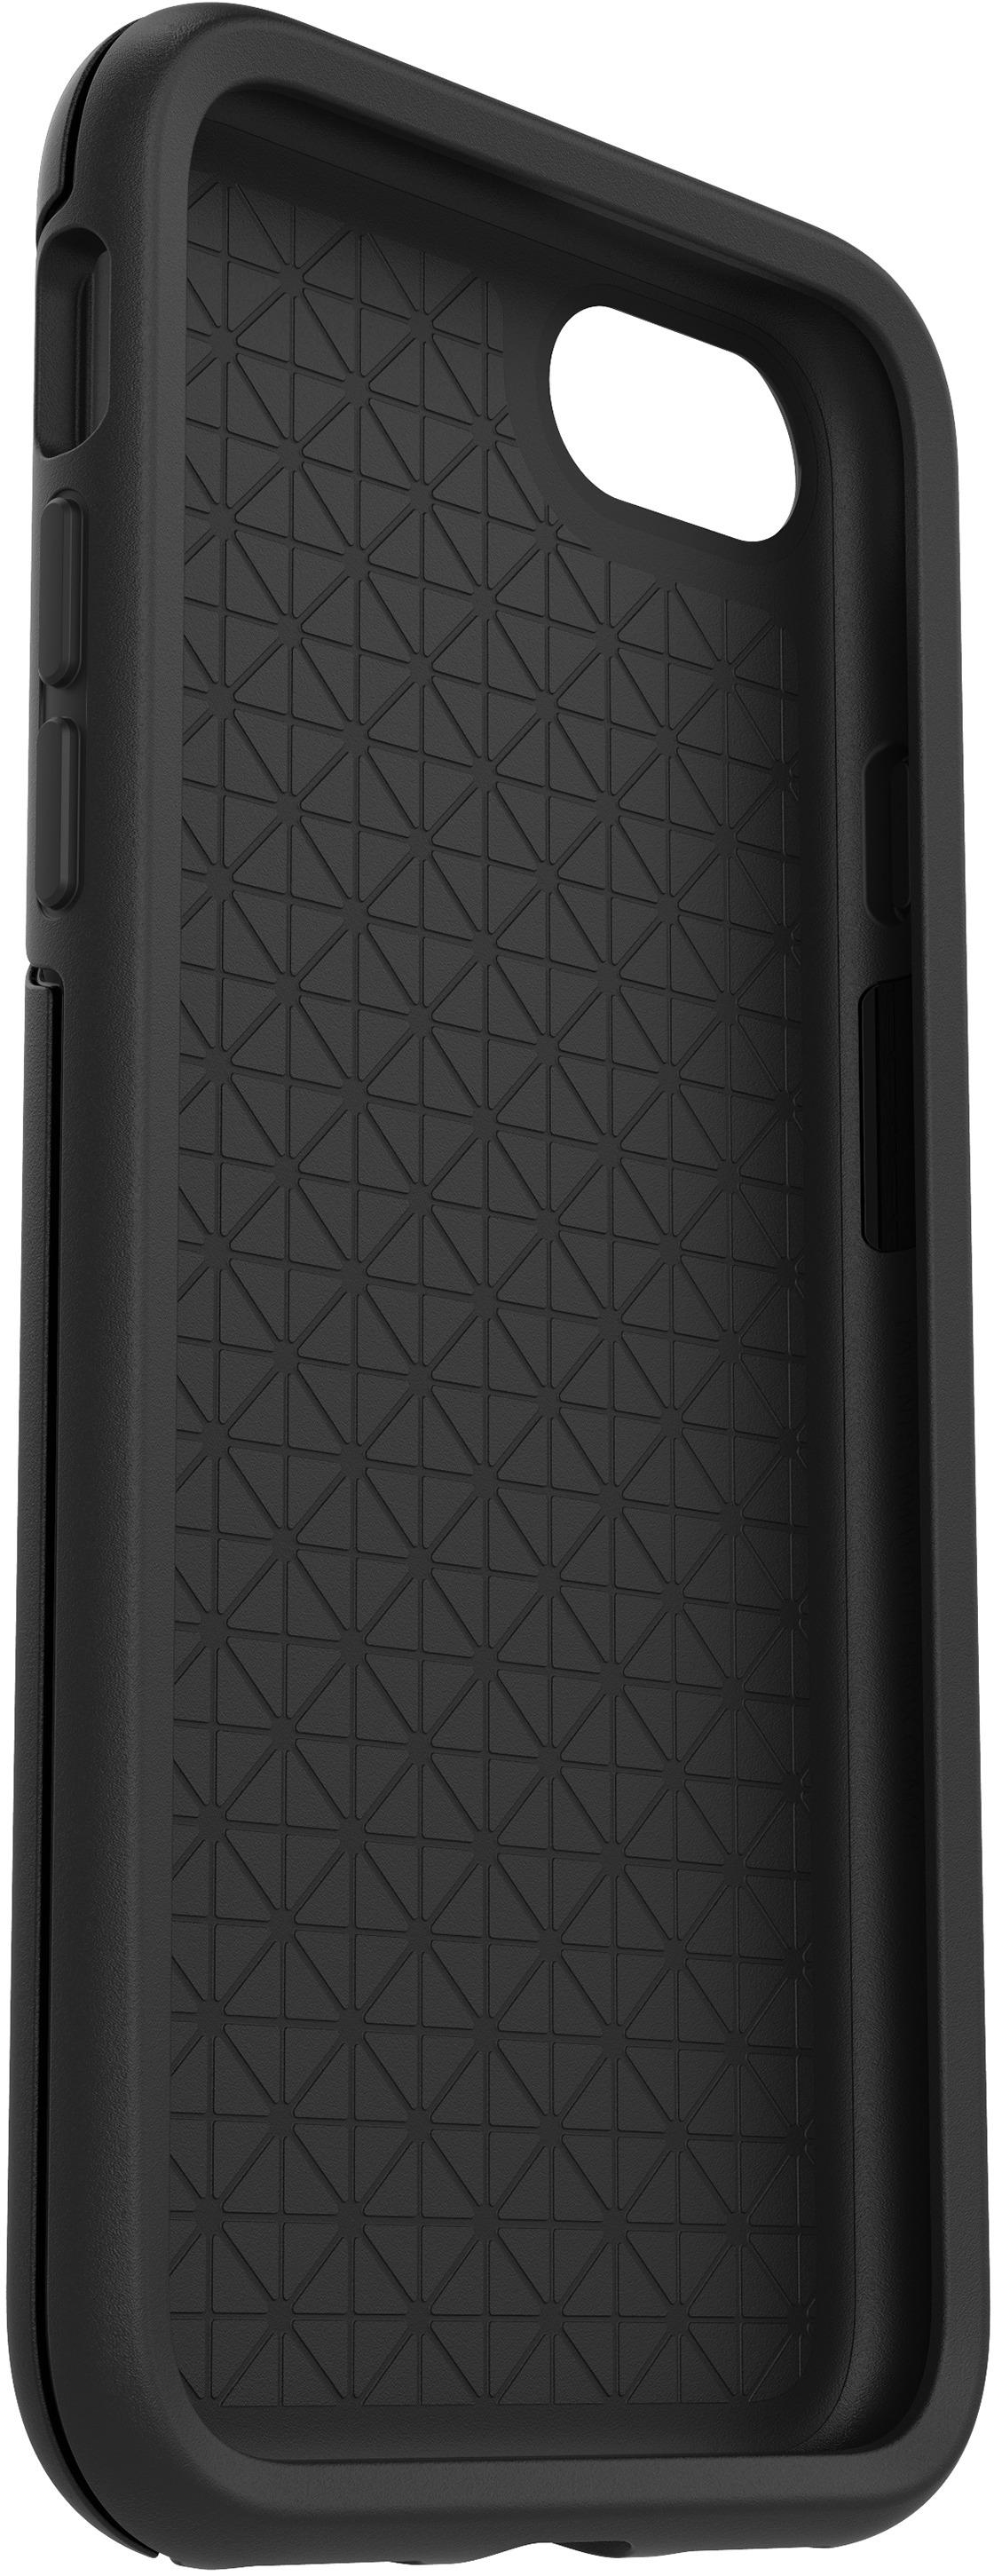 Best Buy: OtterBox Symmetry Series Hard Shell Case for Apple iPhone 7 ...